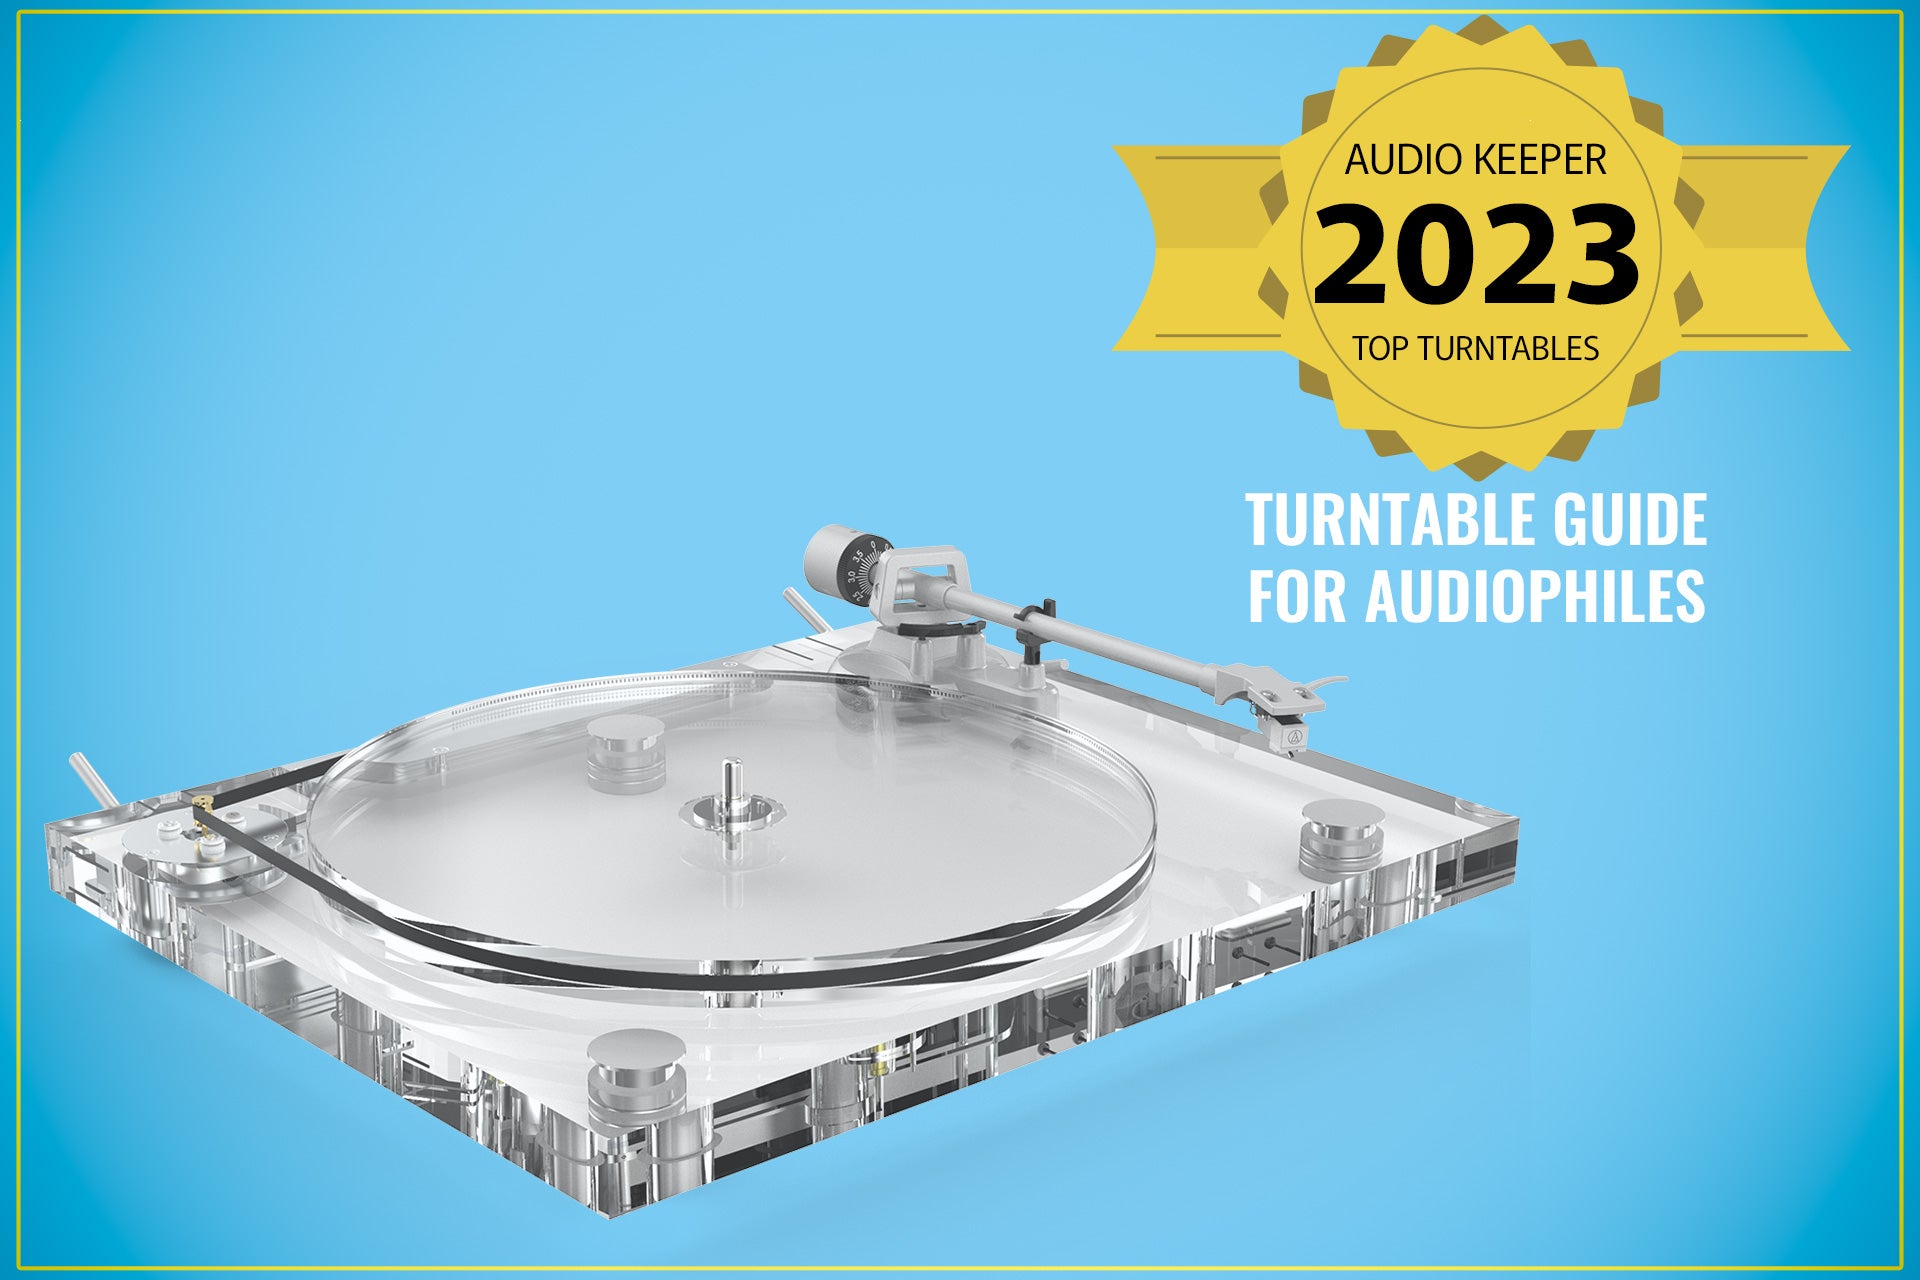 Turntable Buying Guide for Audiophiles